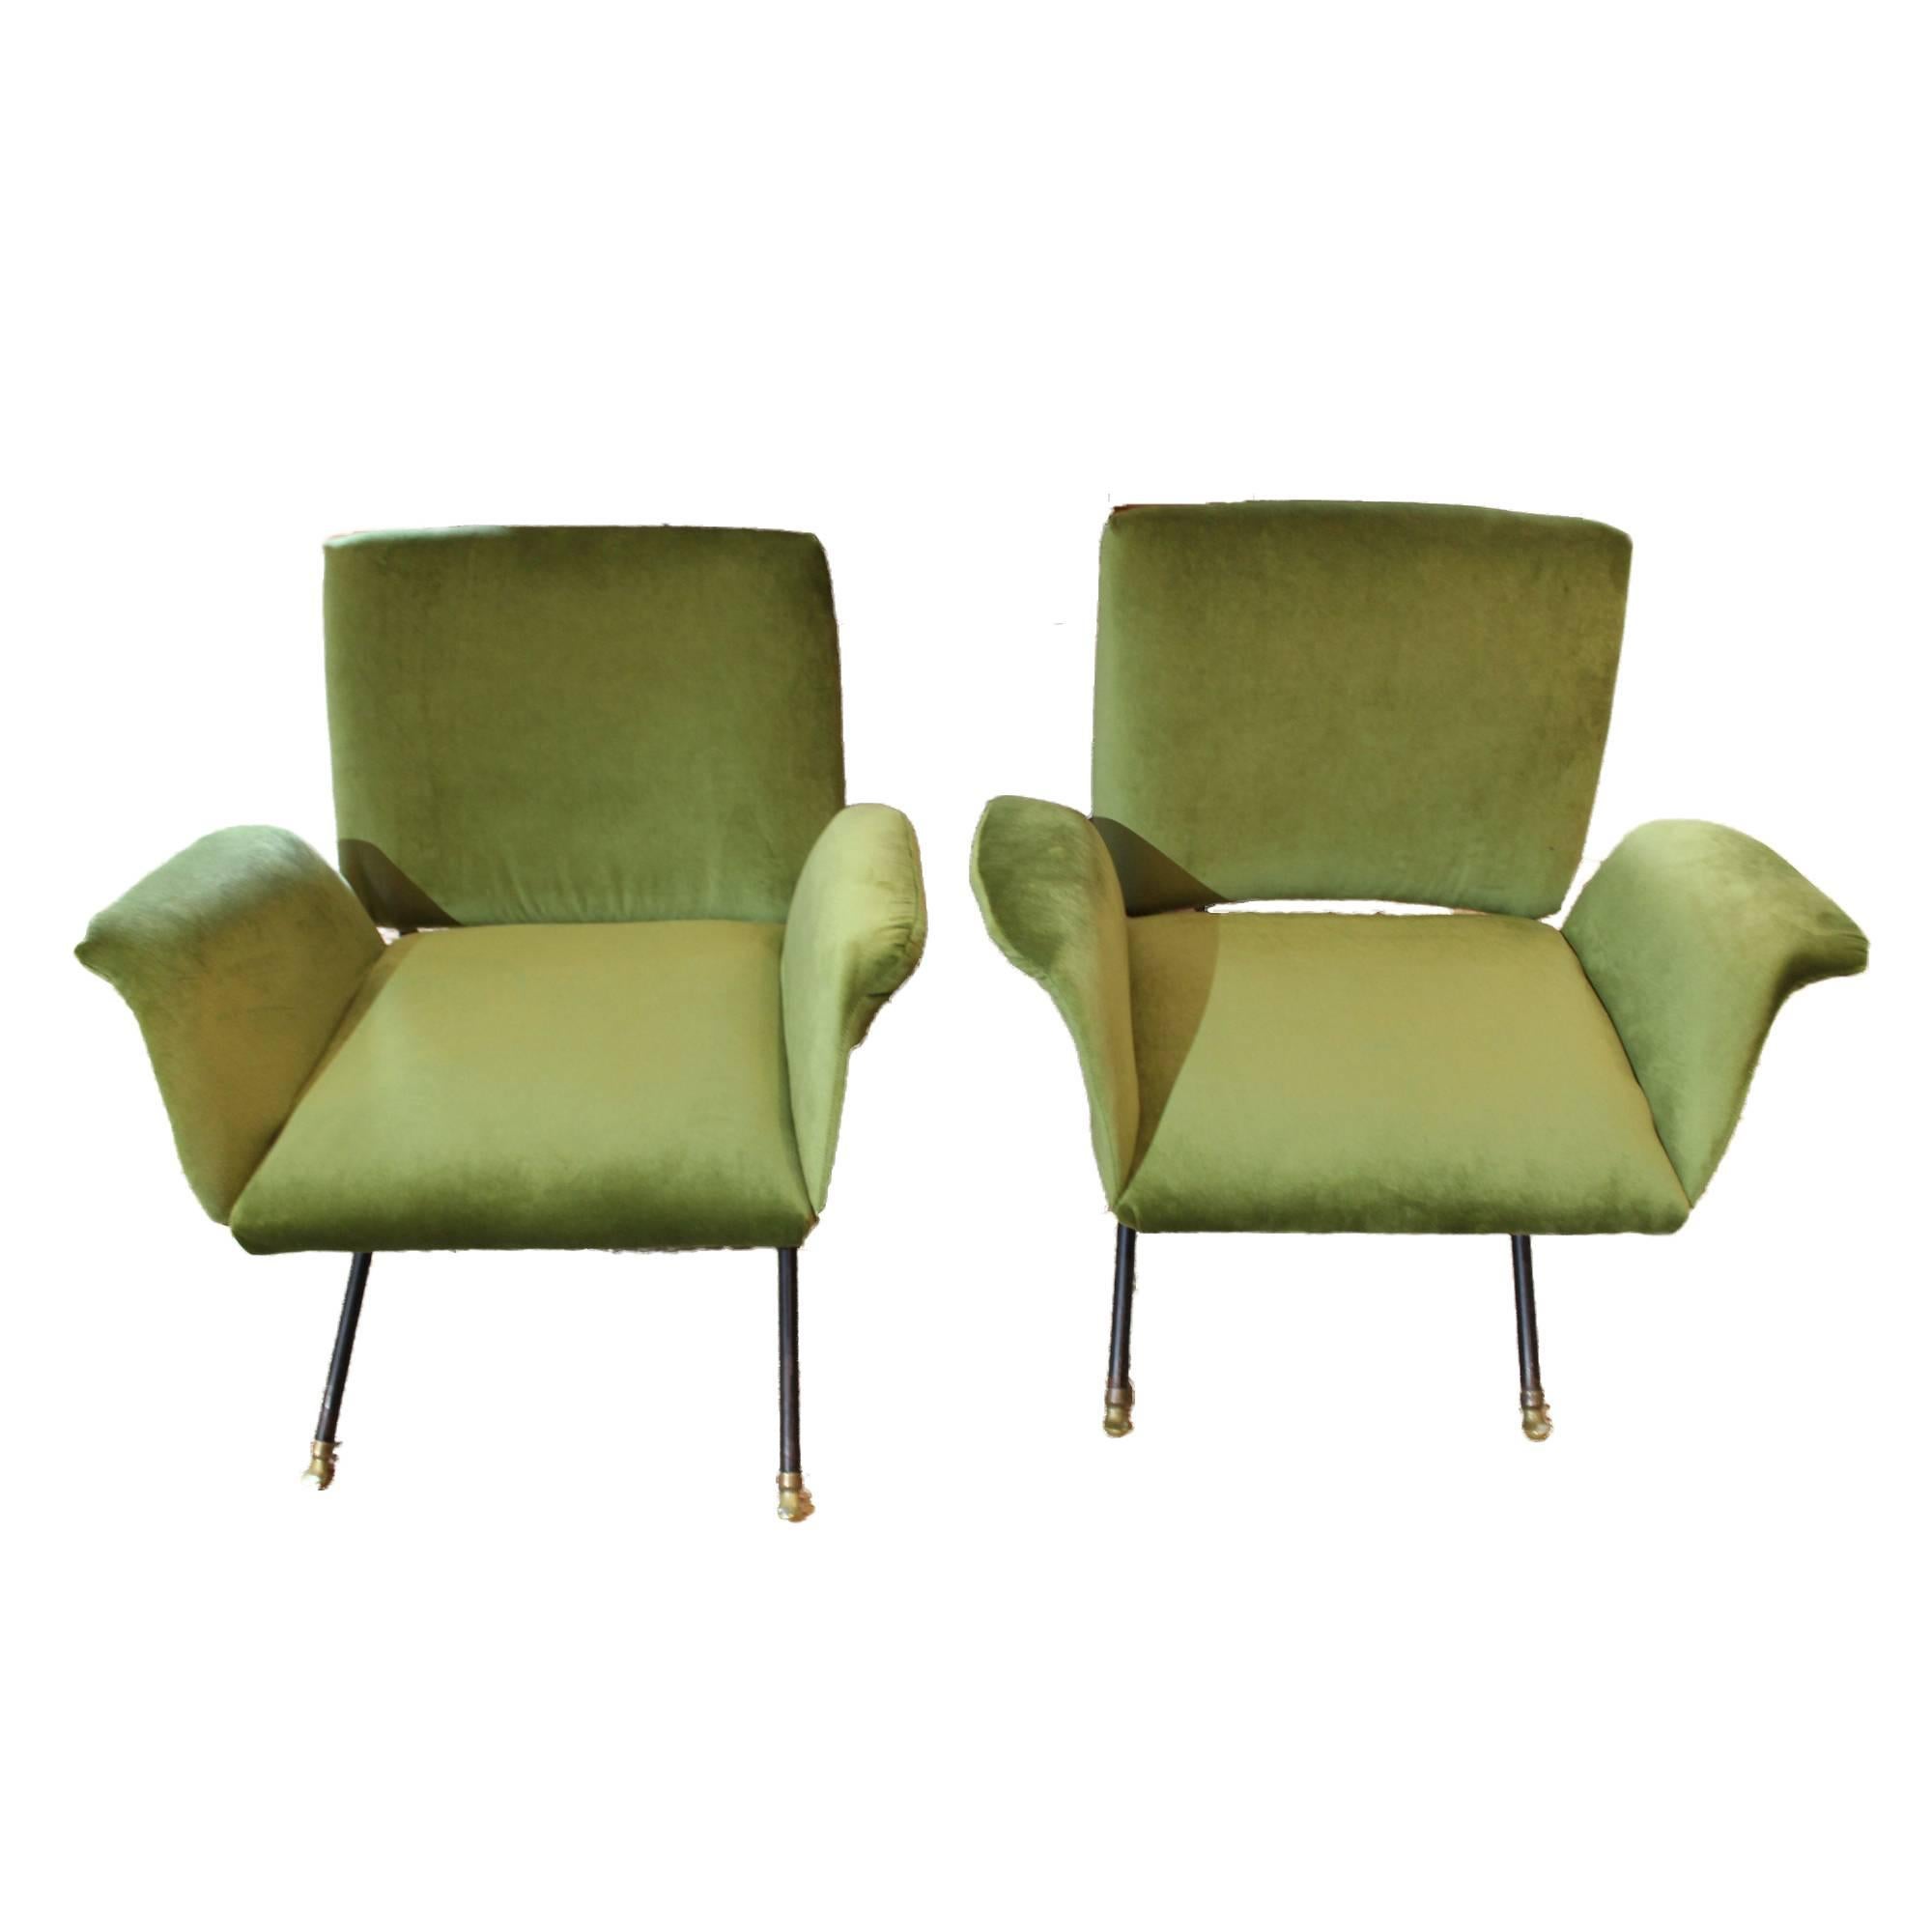 Pair of Moss Green Chairs